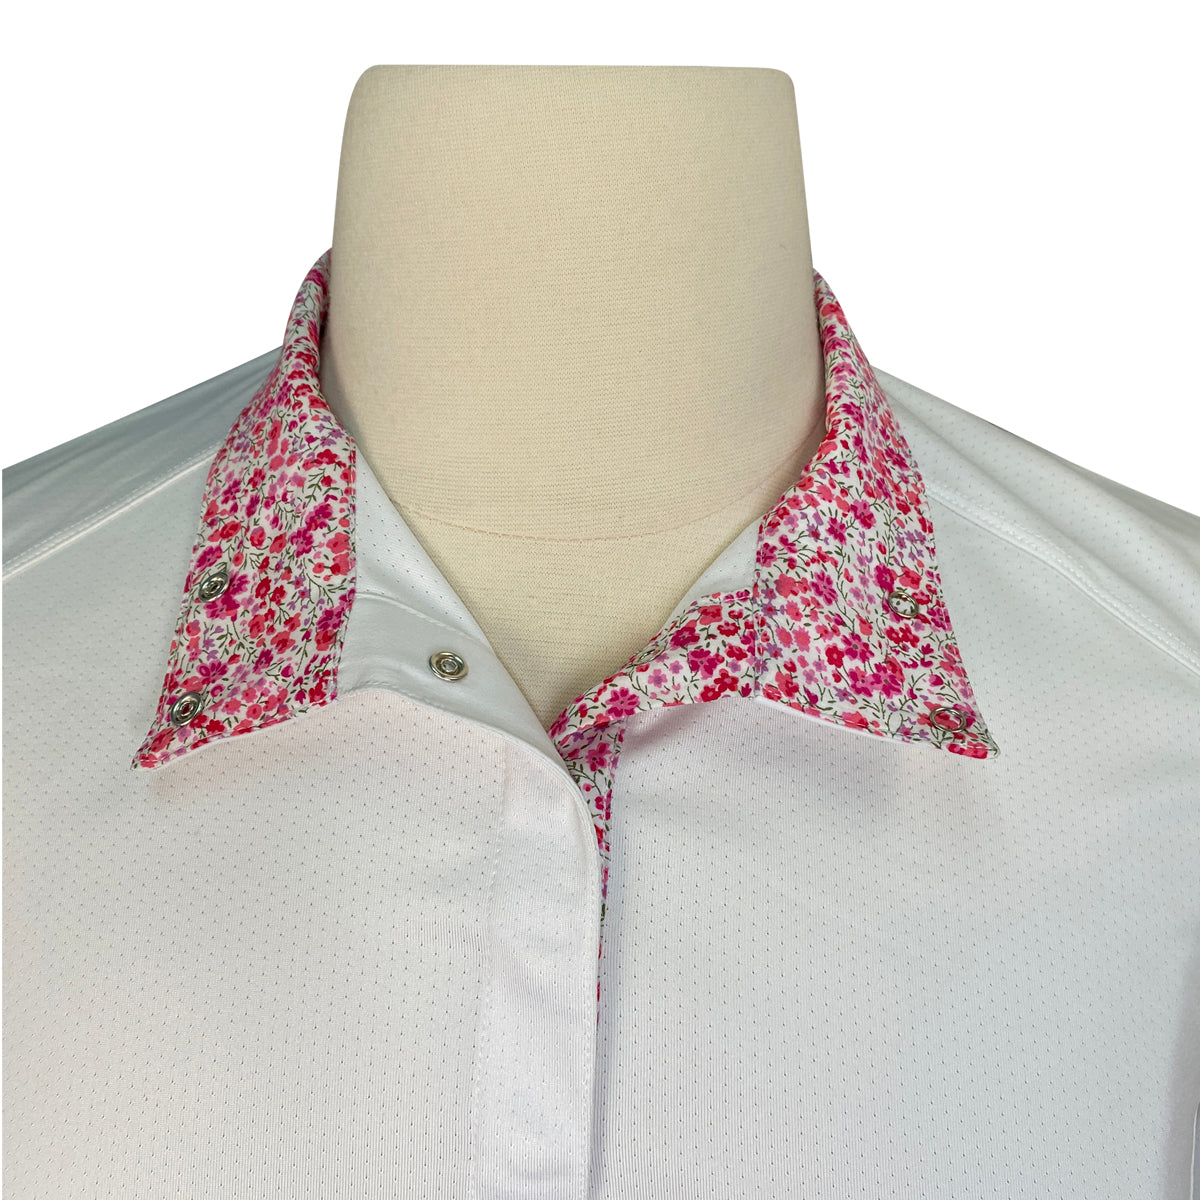 Dover Saddlery &#39;Coolblast&#39; Show Shirt in White/Cherry Blossoms